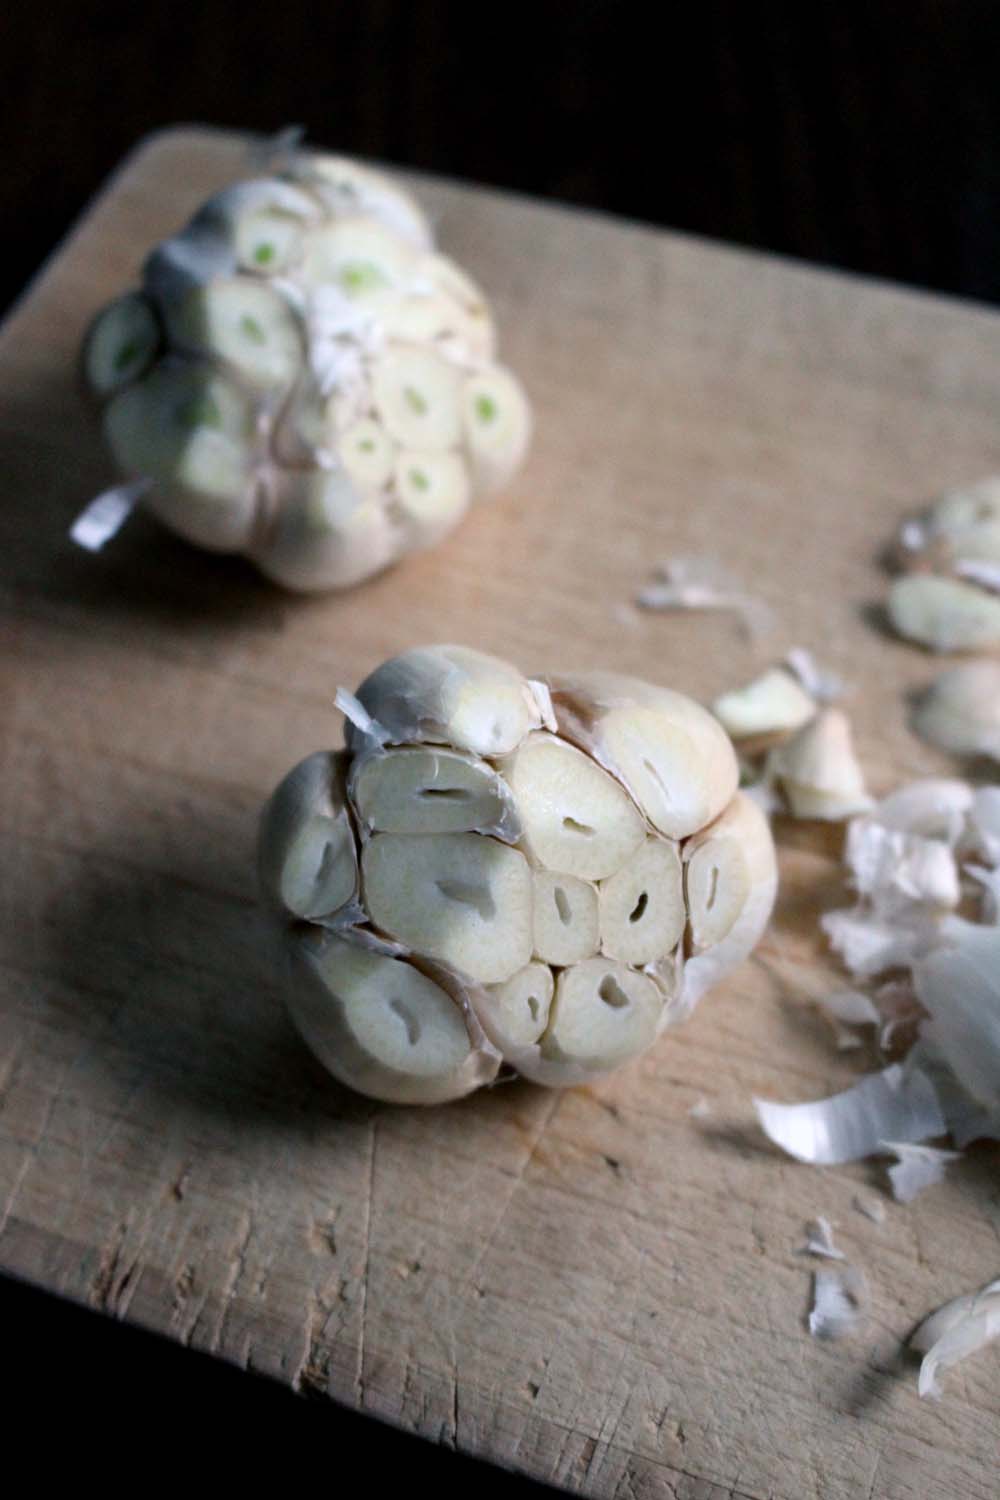 Heads of garlic cloves, one in foreground and one in background, with tops of garlic heads sliced off to reveal garlic inside.